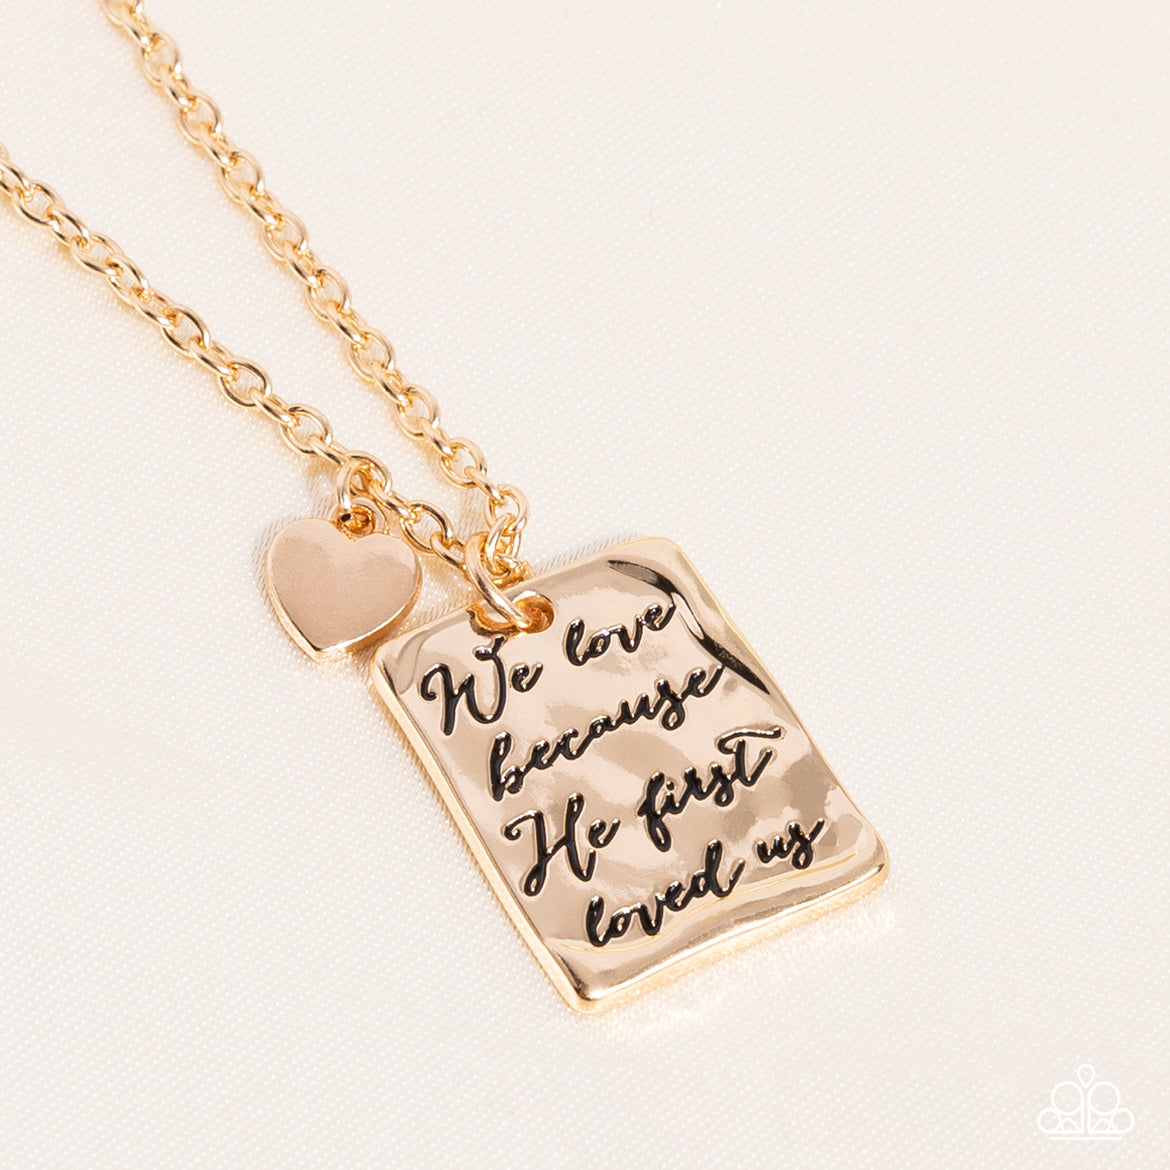 Dangling from a delicate gold chain, a hammered rectangular plate swings for eye-catching movement. The religious phrase "We love because he first loved us" prominently stands out in the center, in an antiqued font. A gold heart charm glides just above the rectangular plate for a vintage-inspired finish. Features an adjustable clasp closure.  Sold as one individual necklace. Includes one pair of matching earrings.